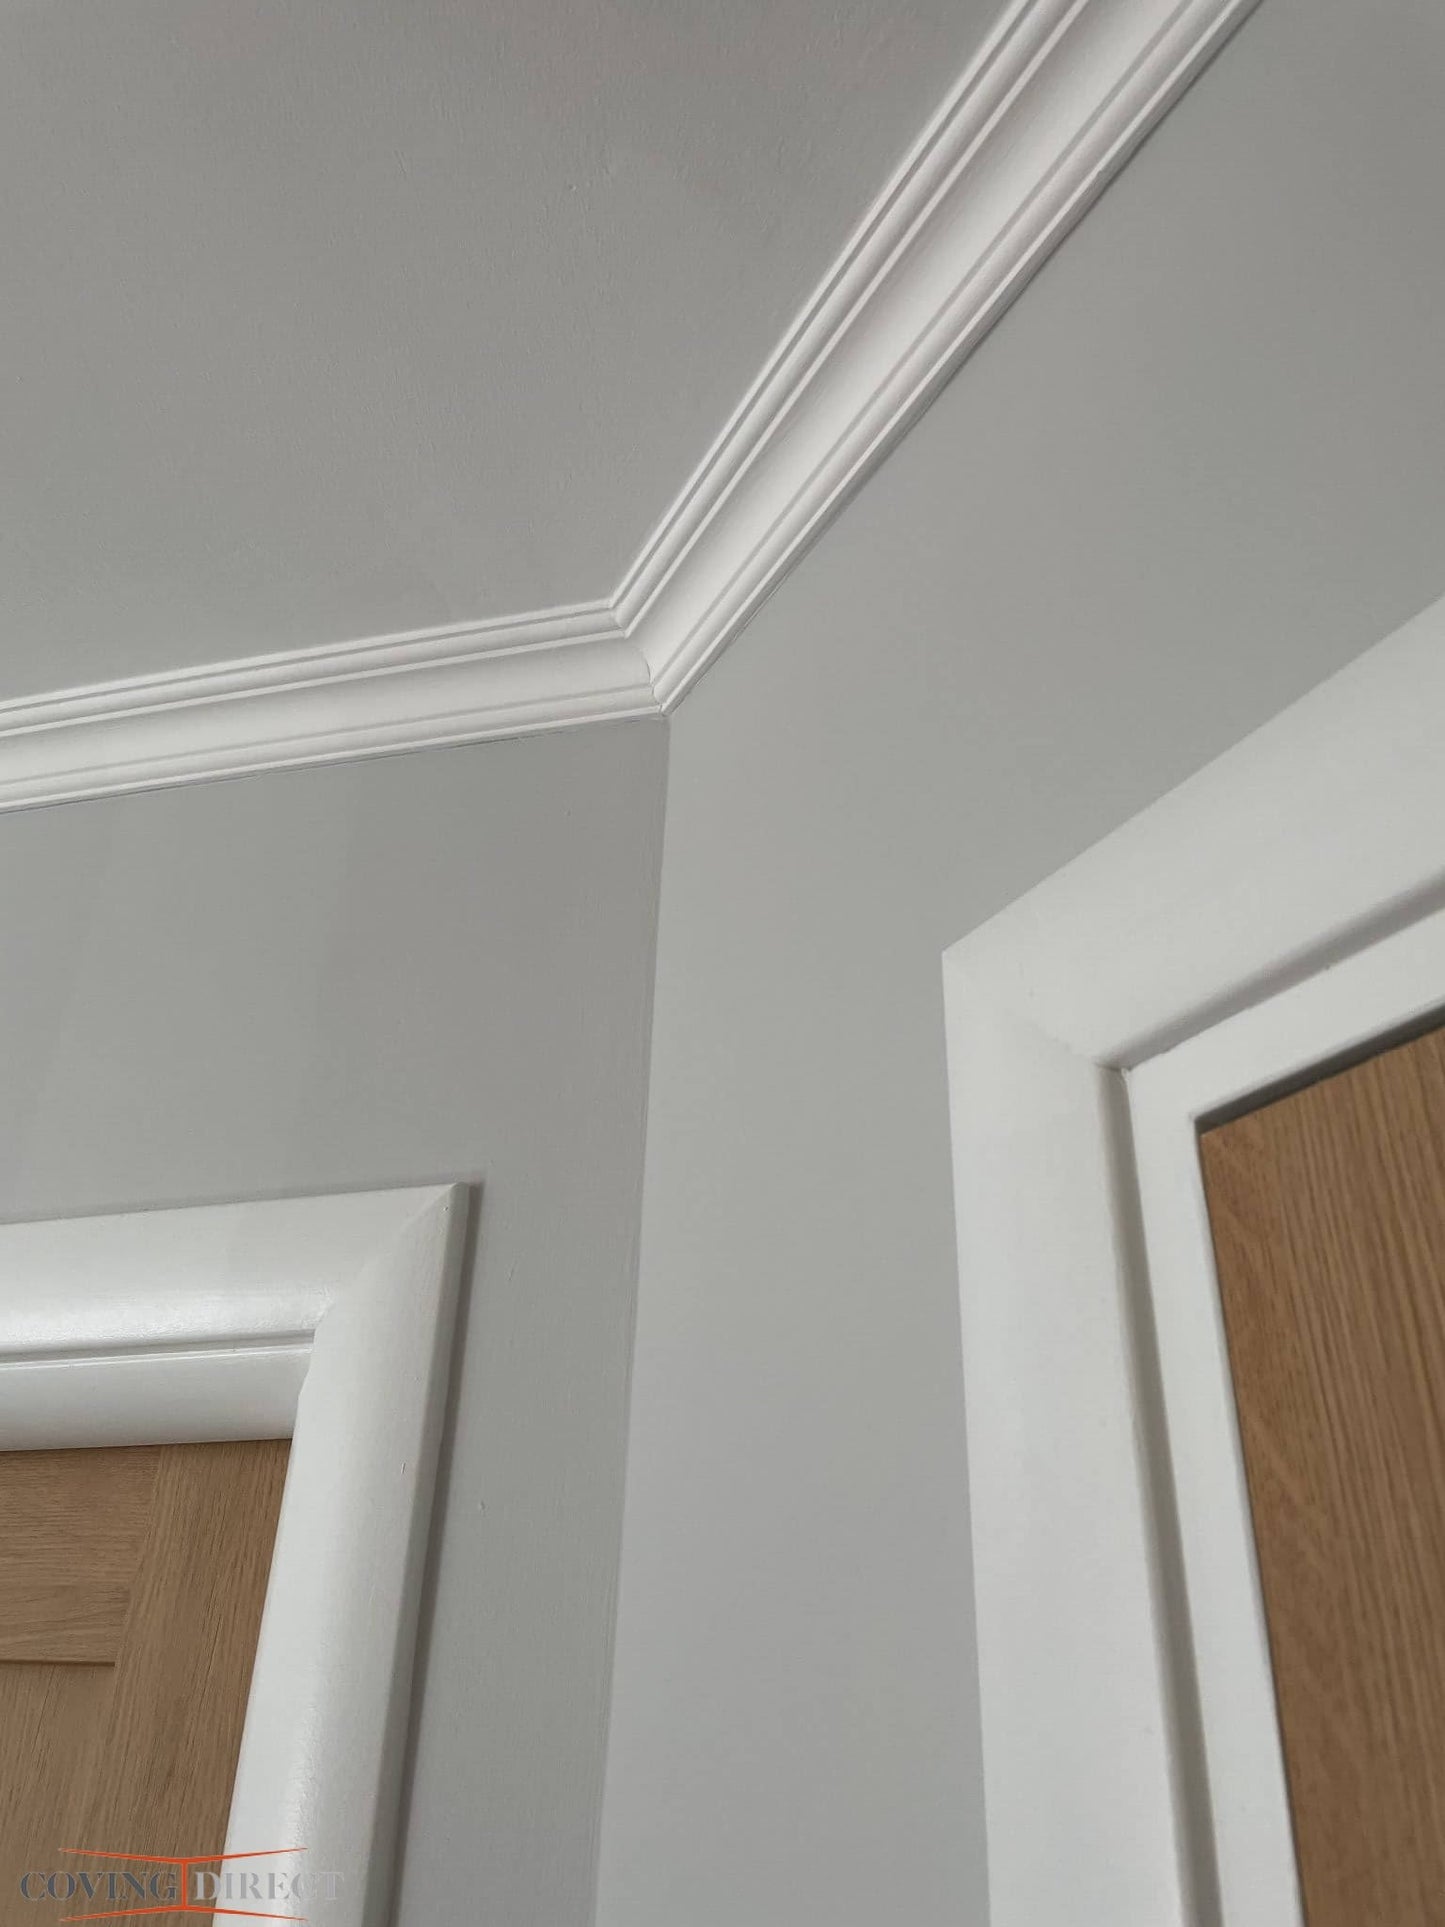 Orlando - Lightweight Coving above two doors